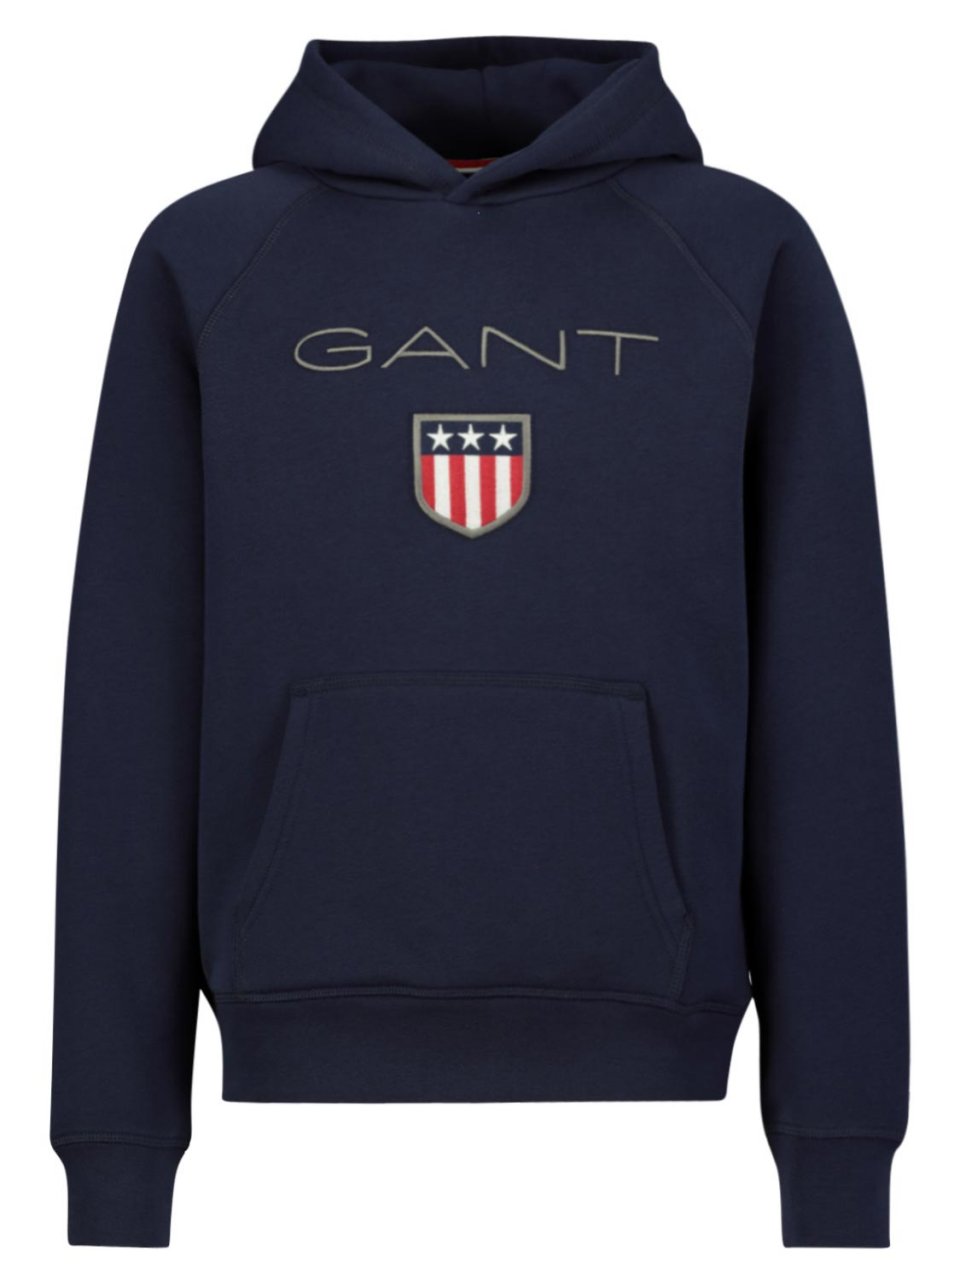 GANT KIDS AND TEEN CLOTHING 906652 NAVY SHIELD HOODIE APPLIQ BRANDED DETAIL 15 & 16YRS ONLY 